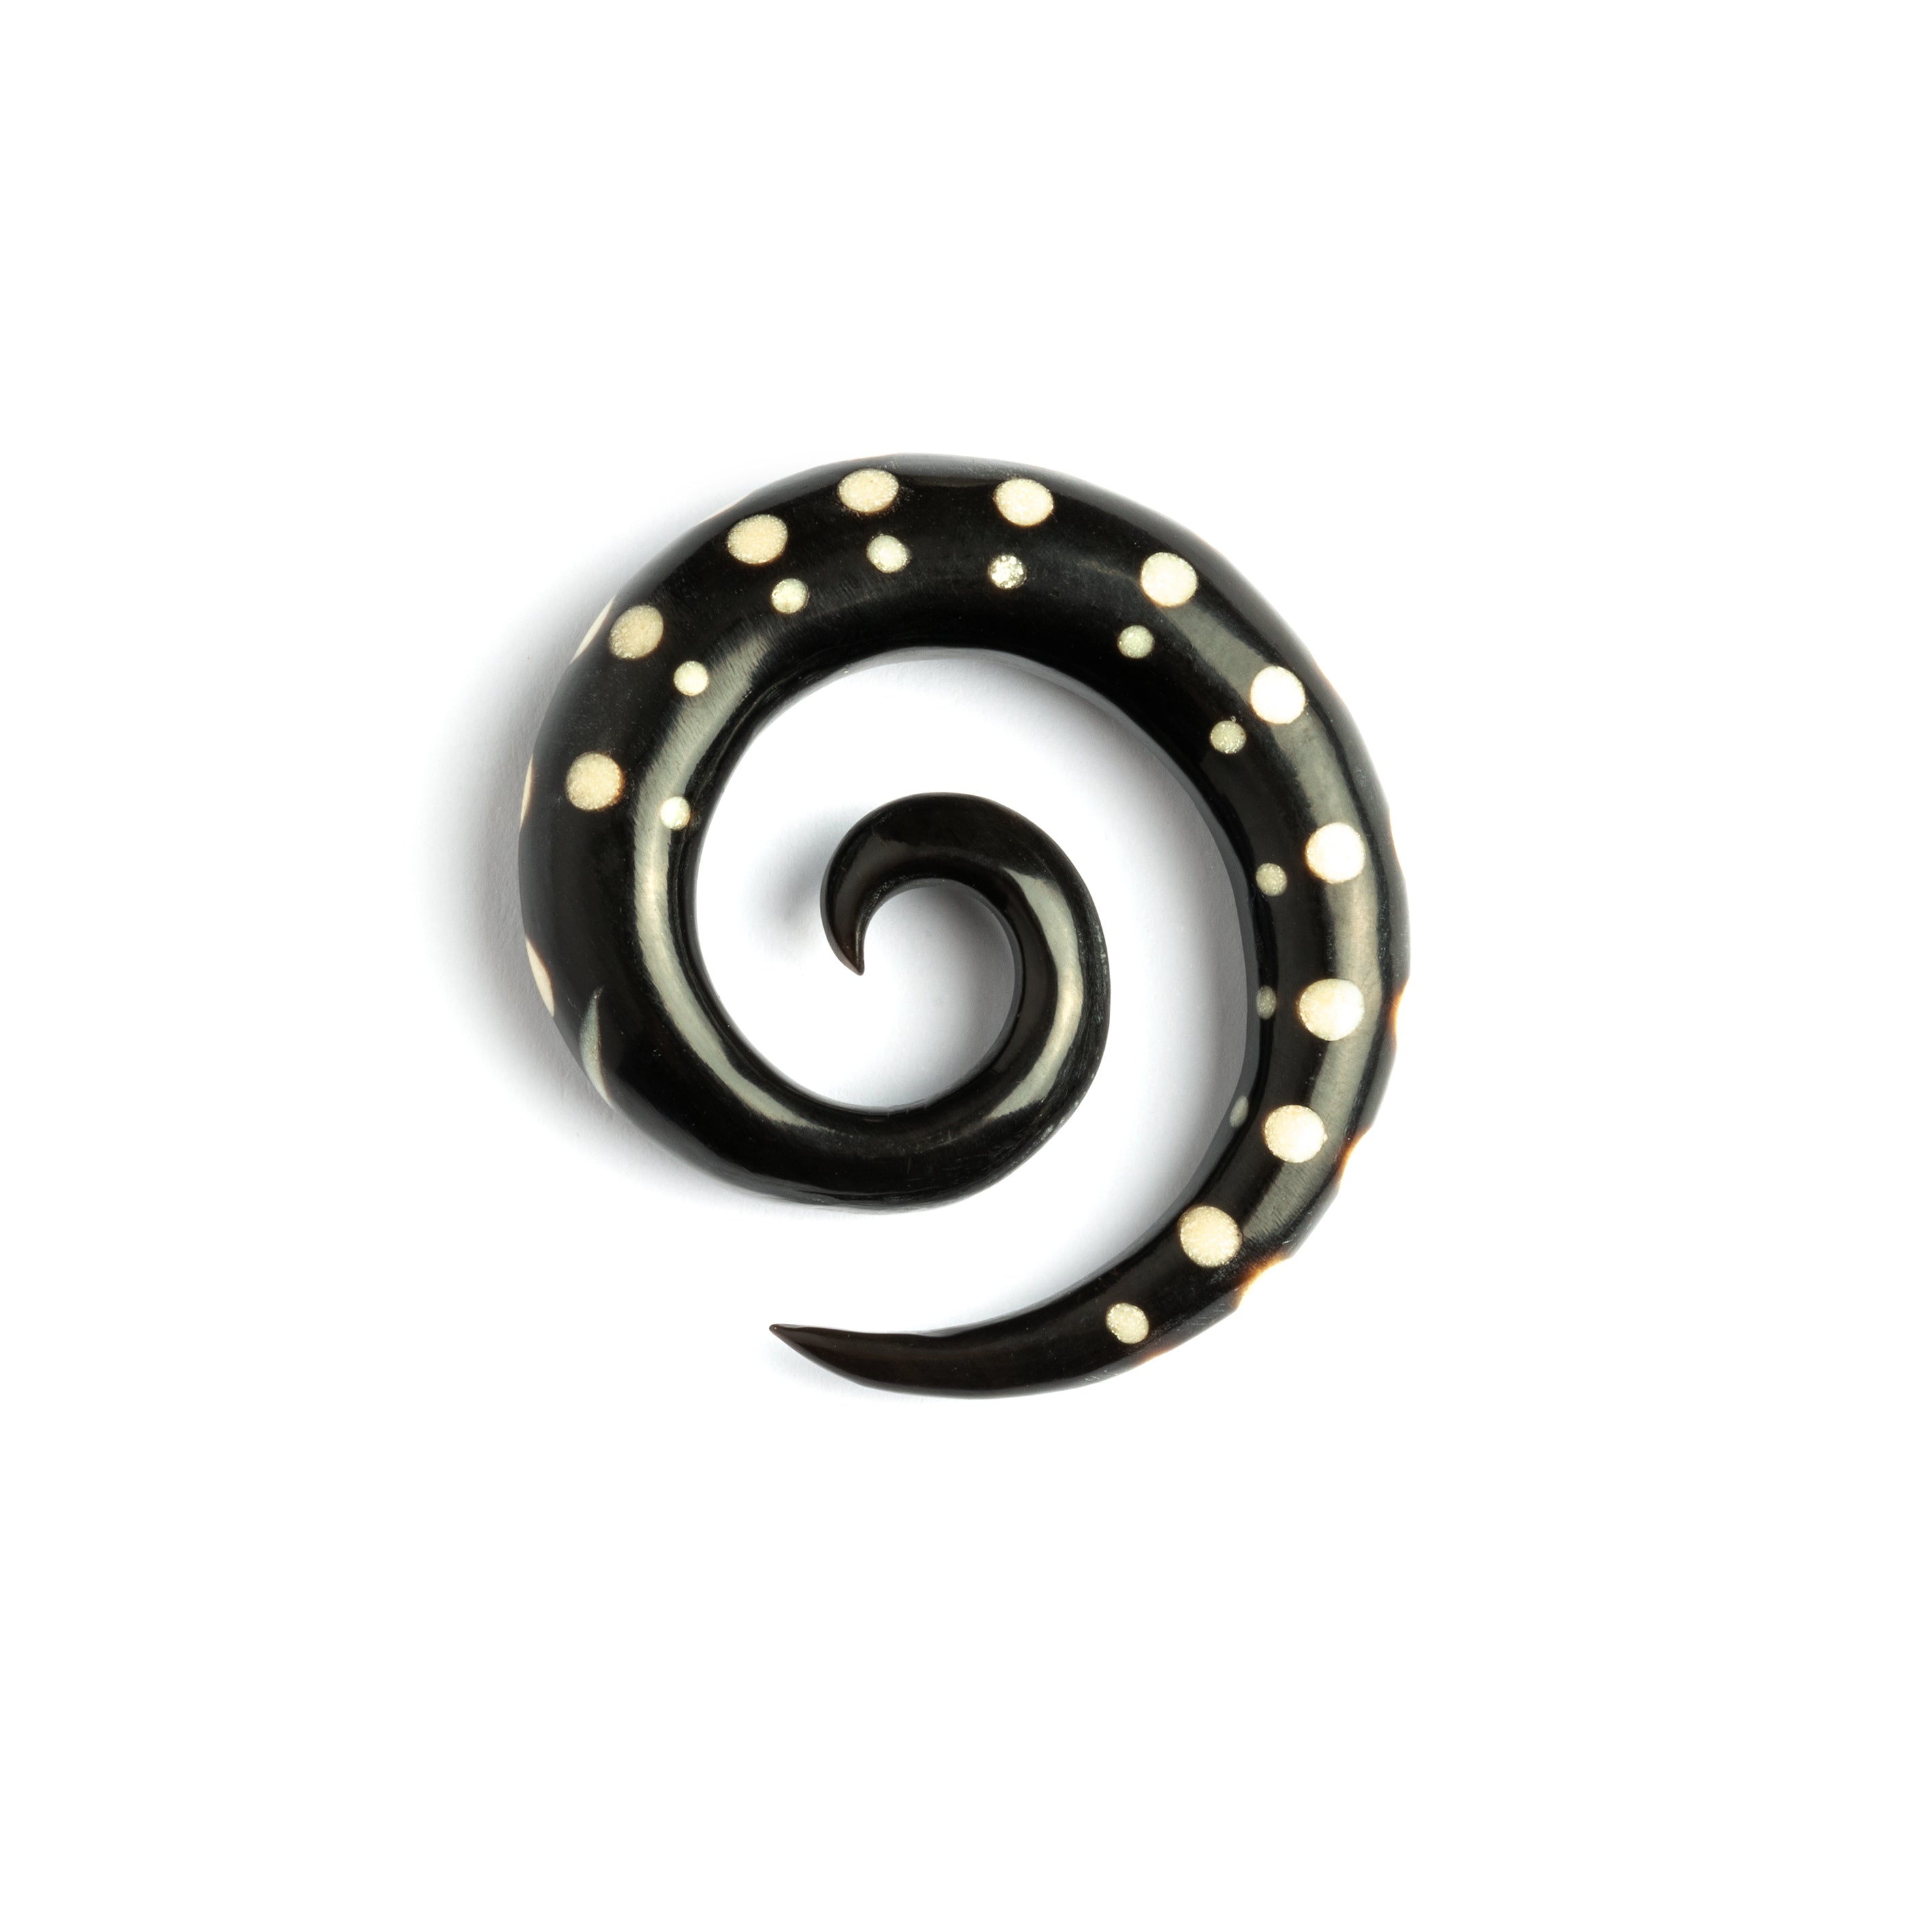 single horn spiral ear stretchers with white dots side view